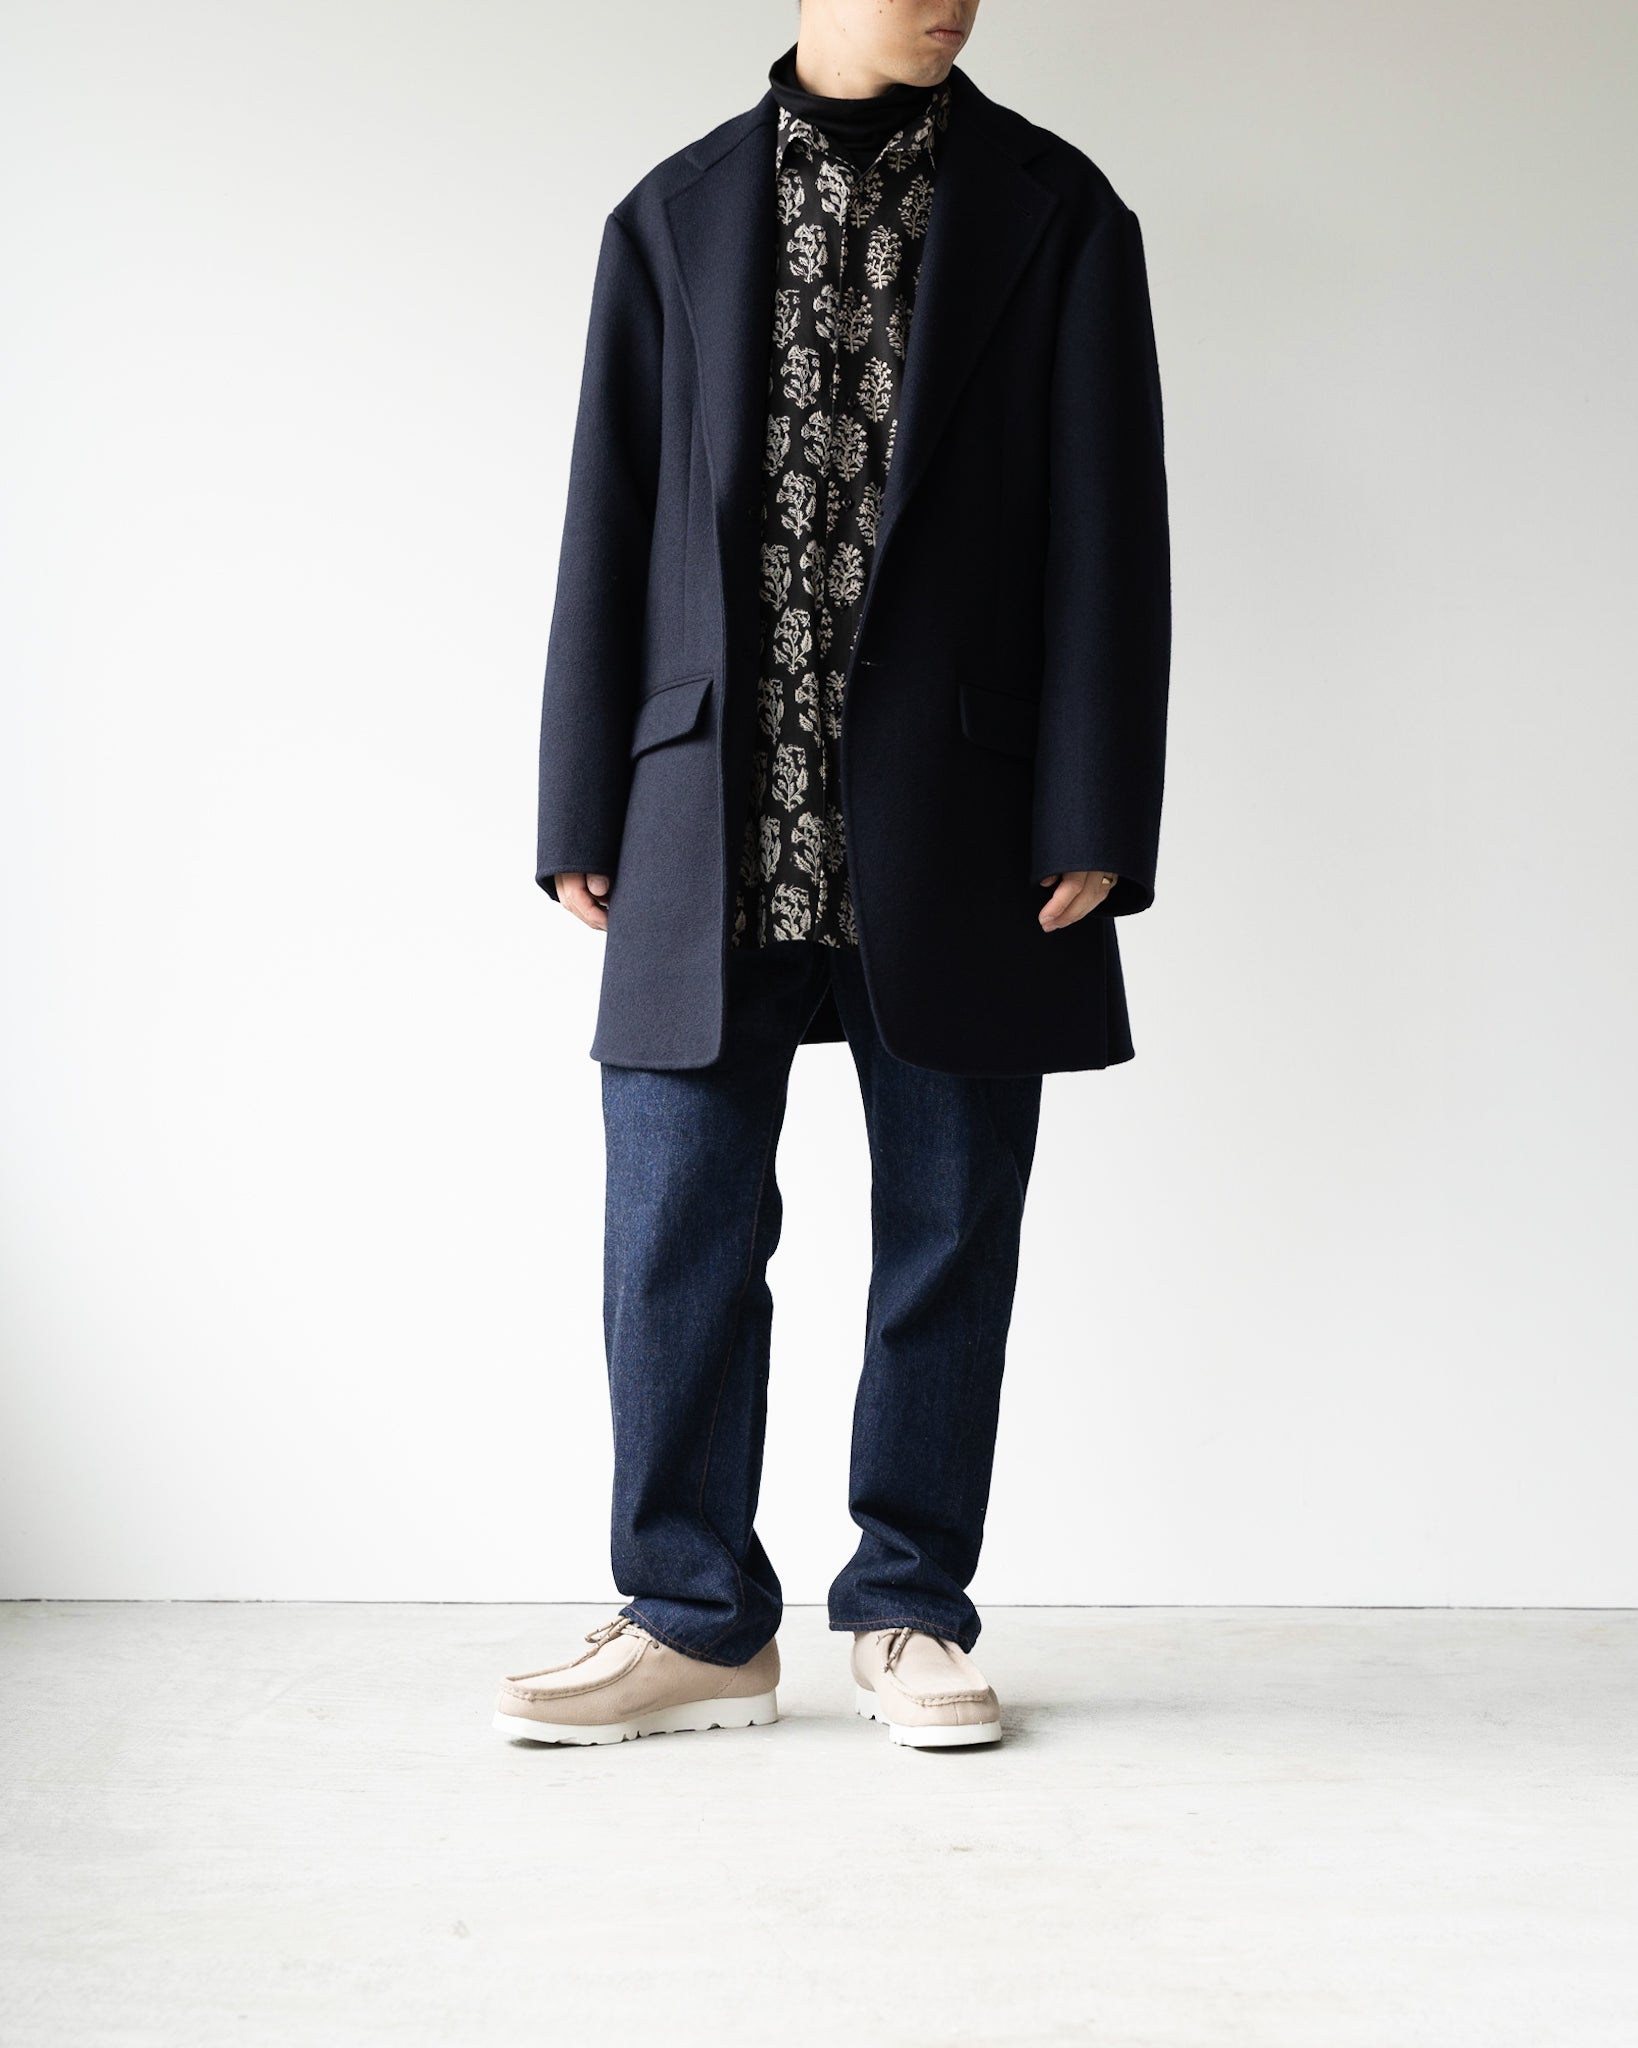 【NICENESS】ANDERSON - D.NAVY